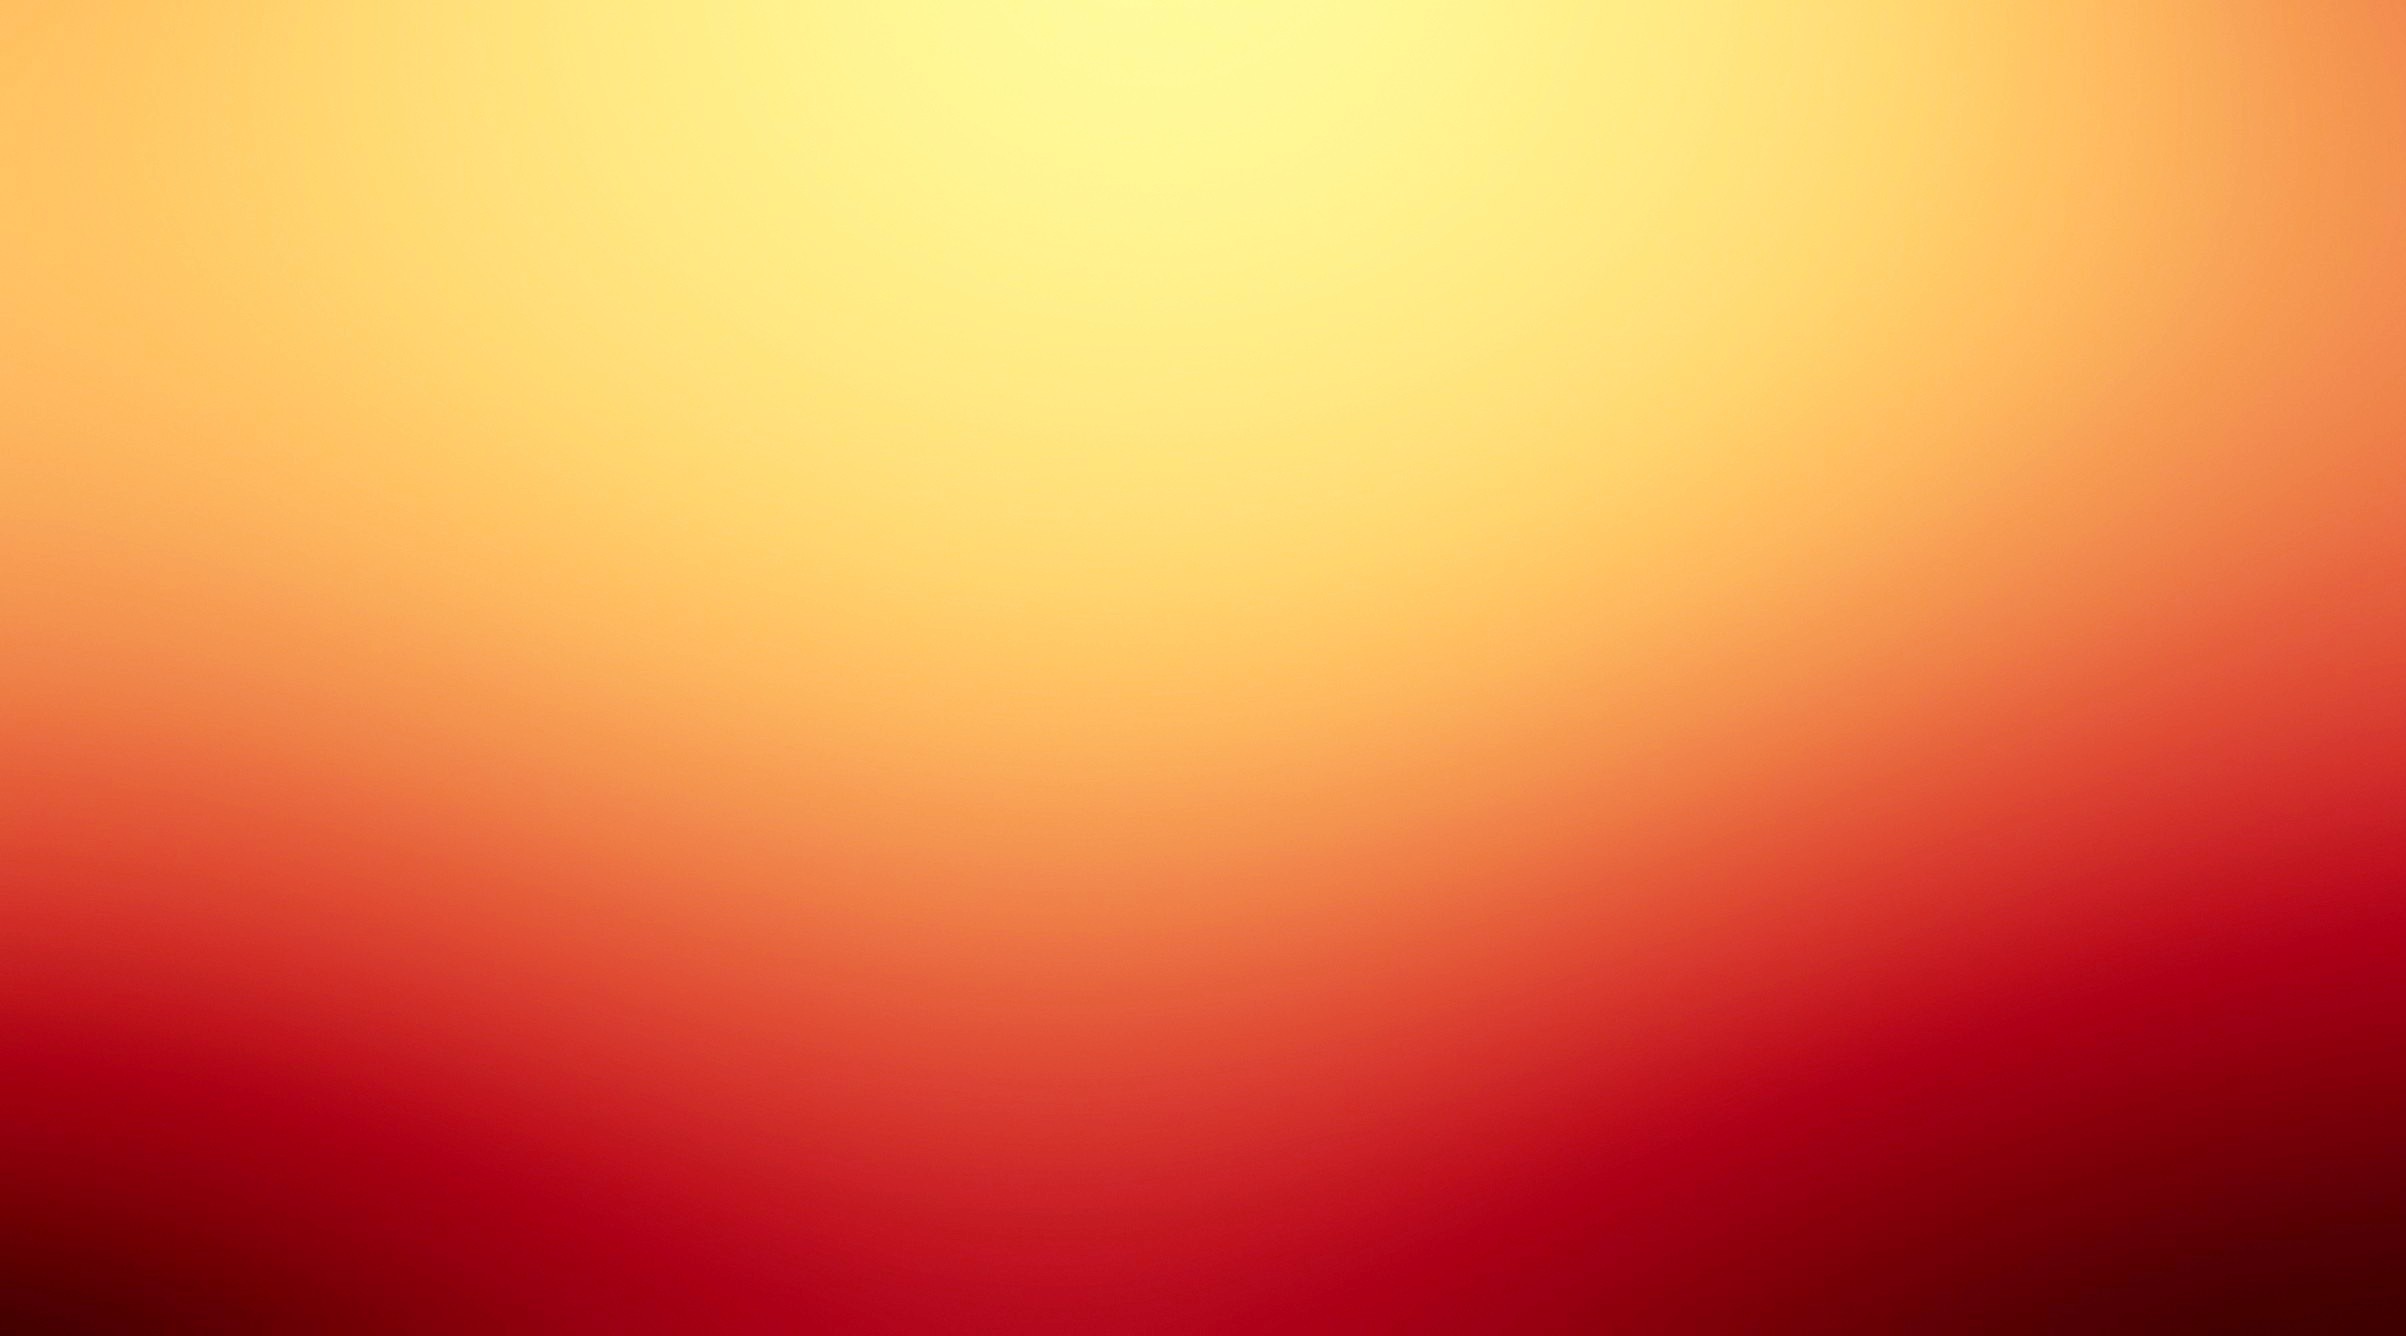 2406x1336 Yellow And Dark Pink Red Background Image